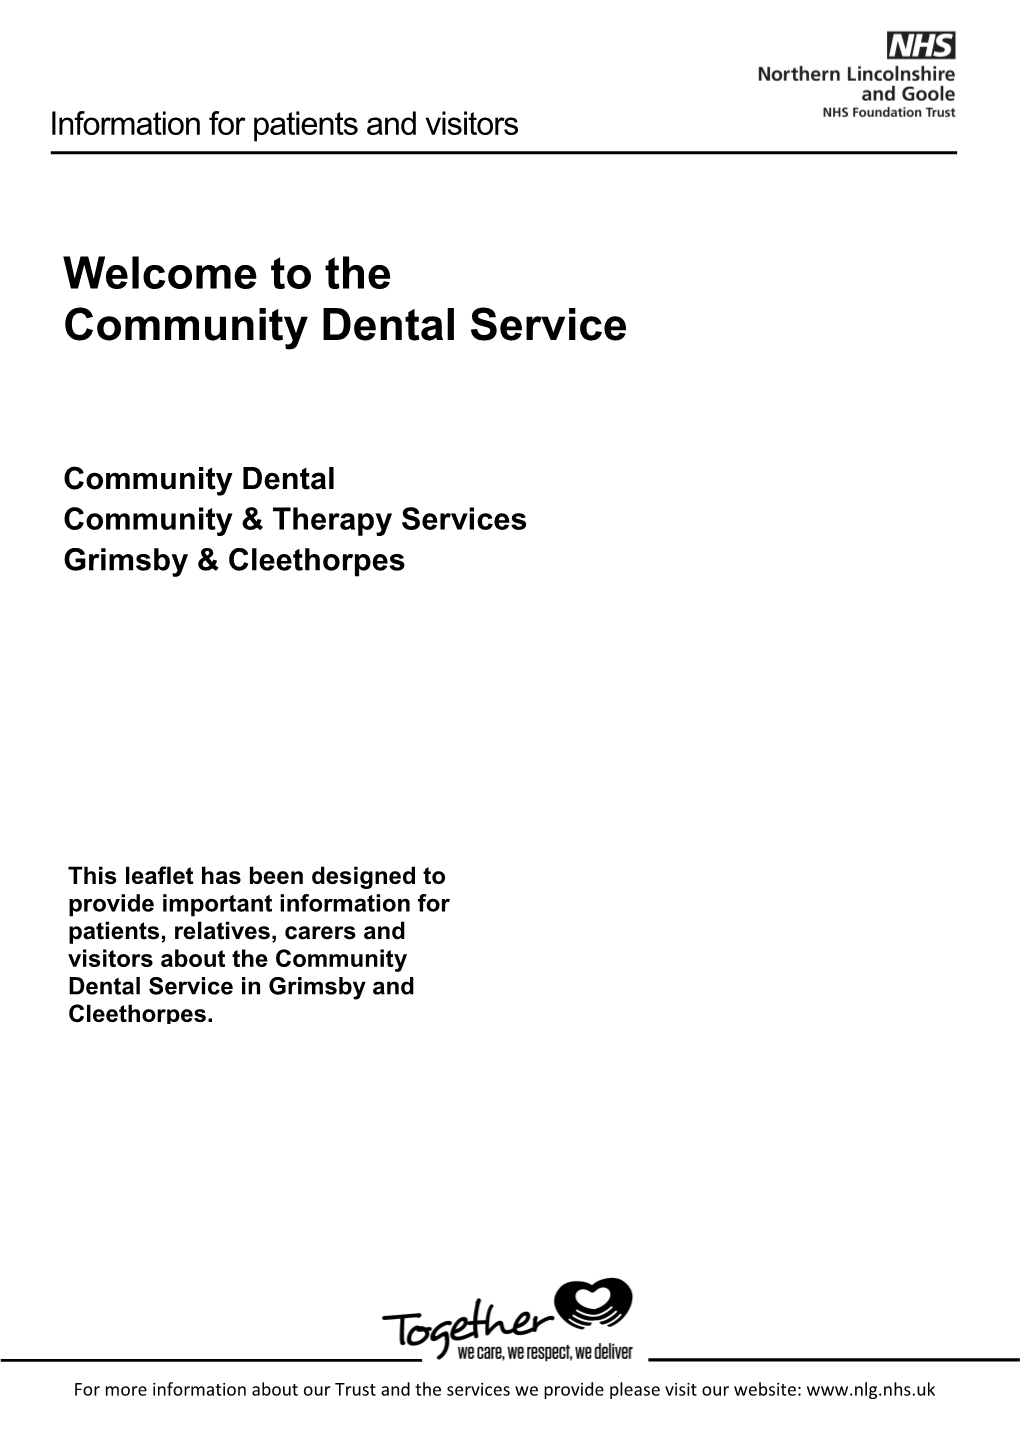 Welcome to the Community Dental Service